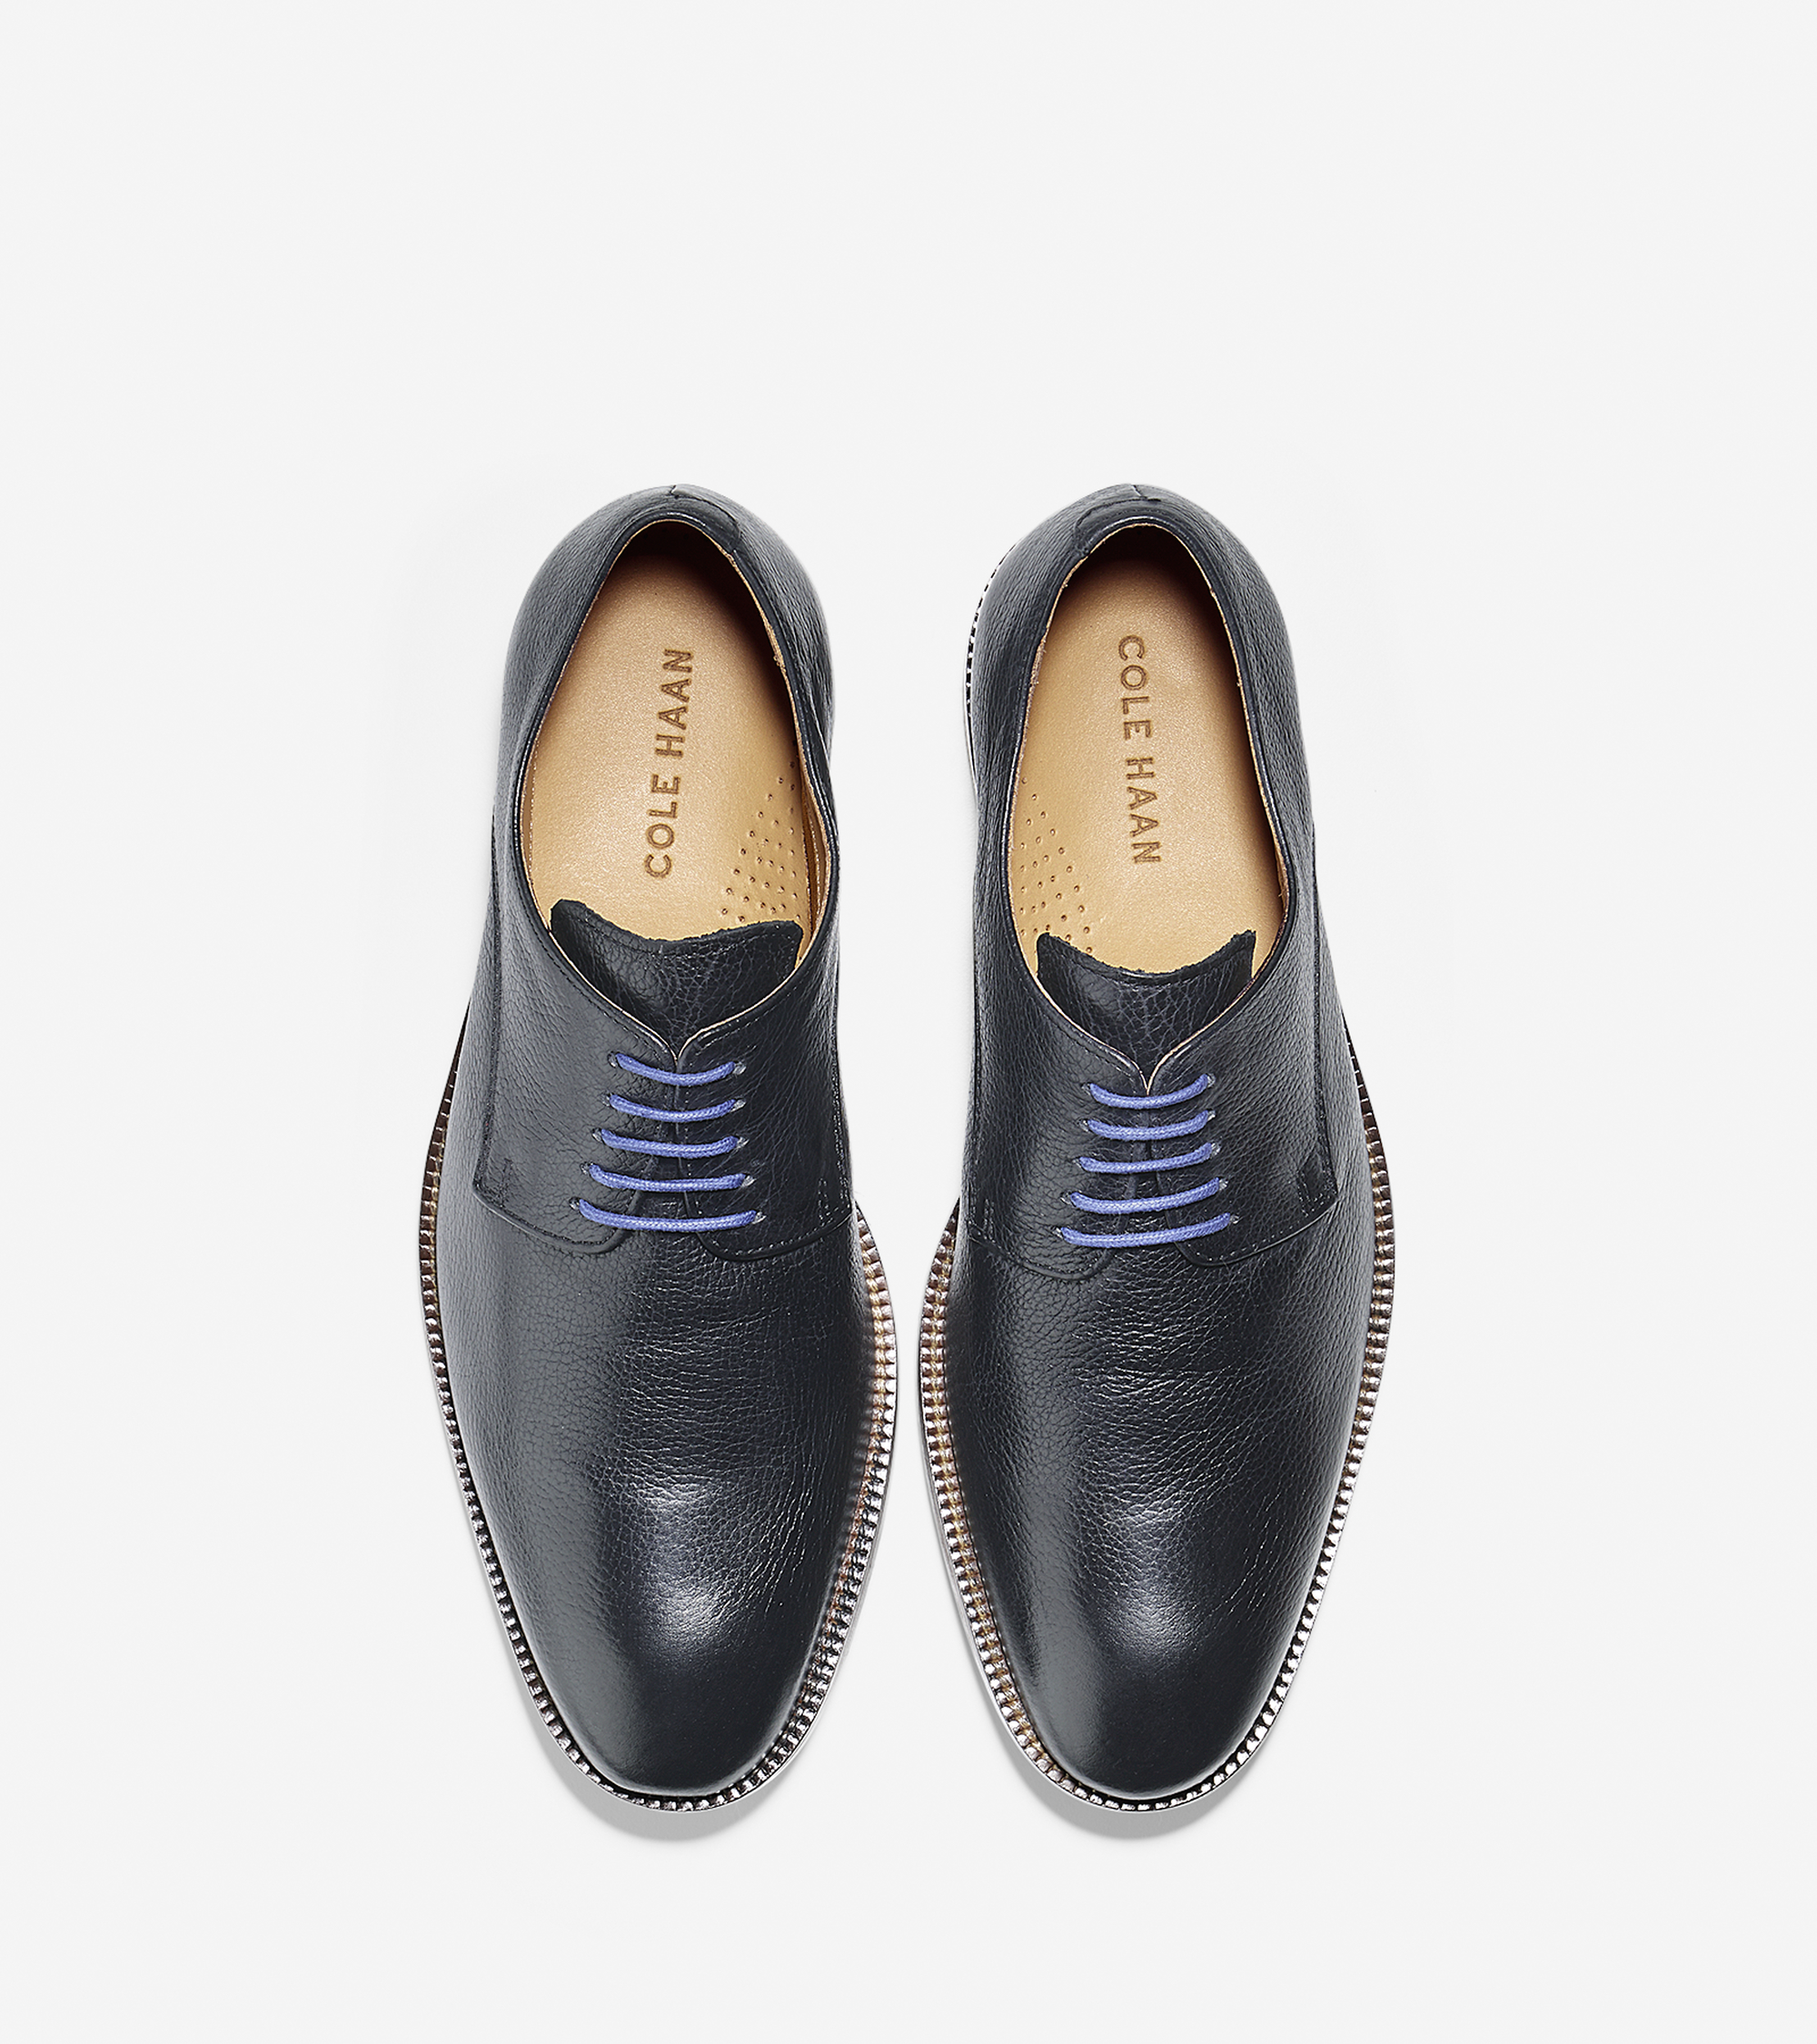 Lyst - Cole Haan Williams Casual Plain Toe Oxford in Blue for Men